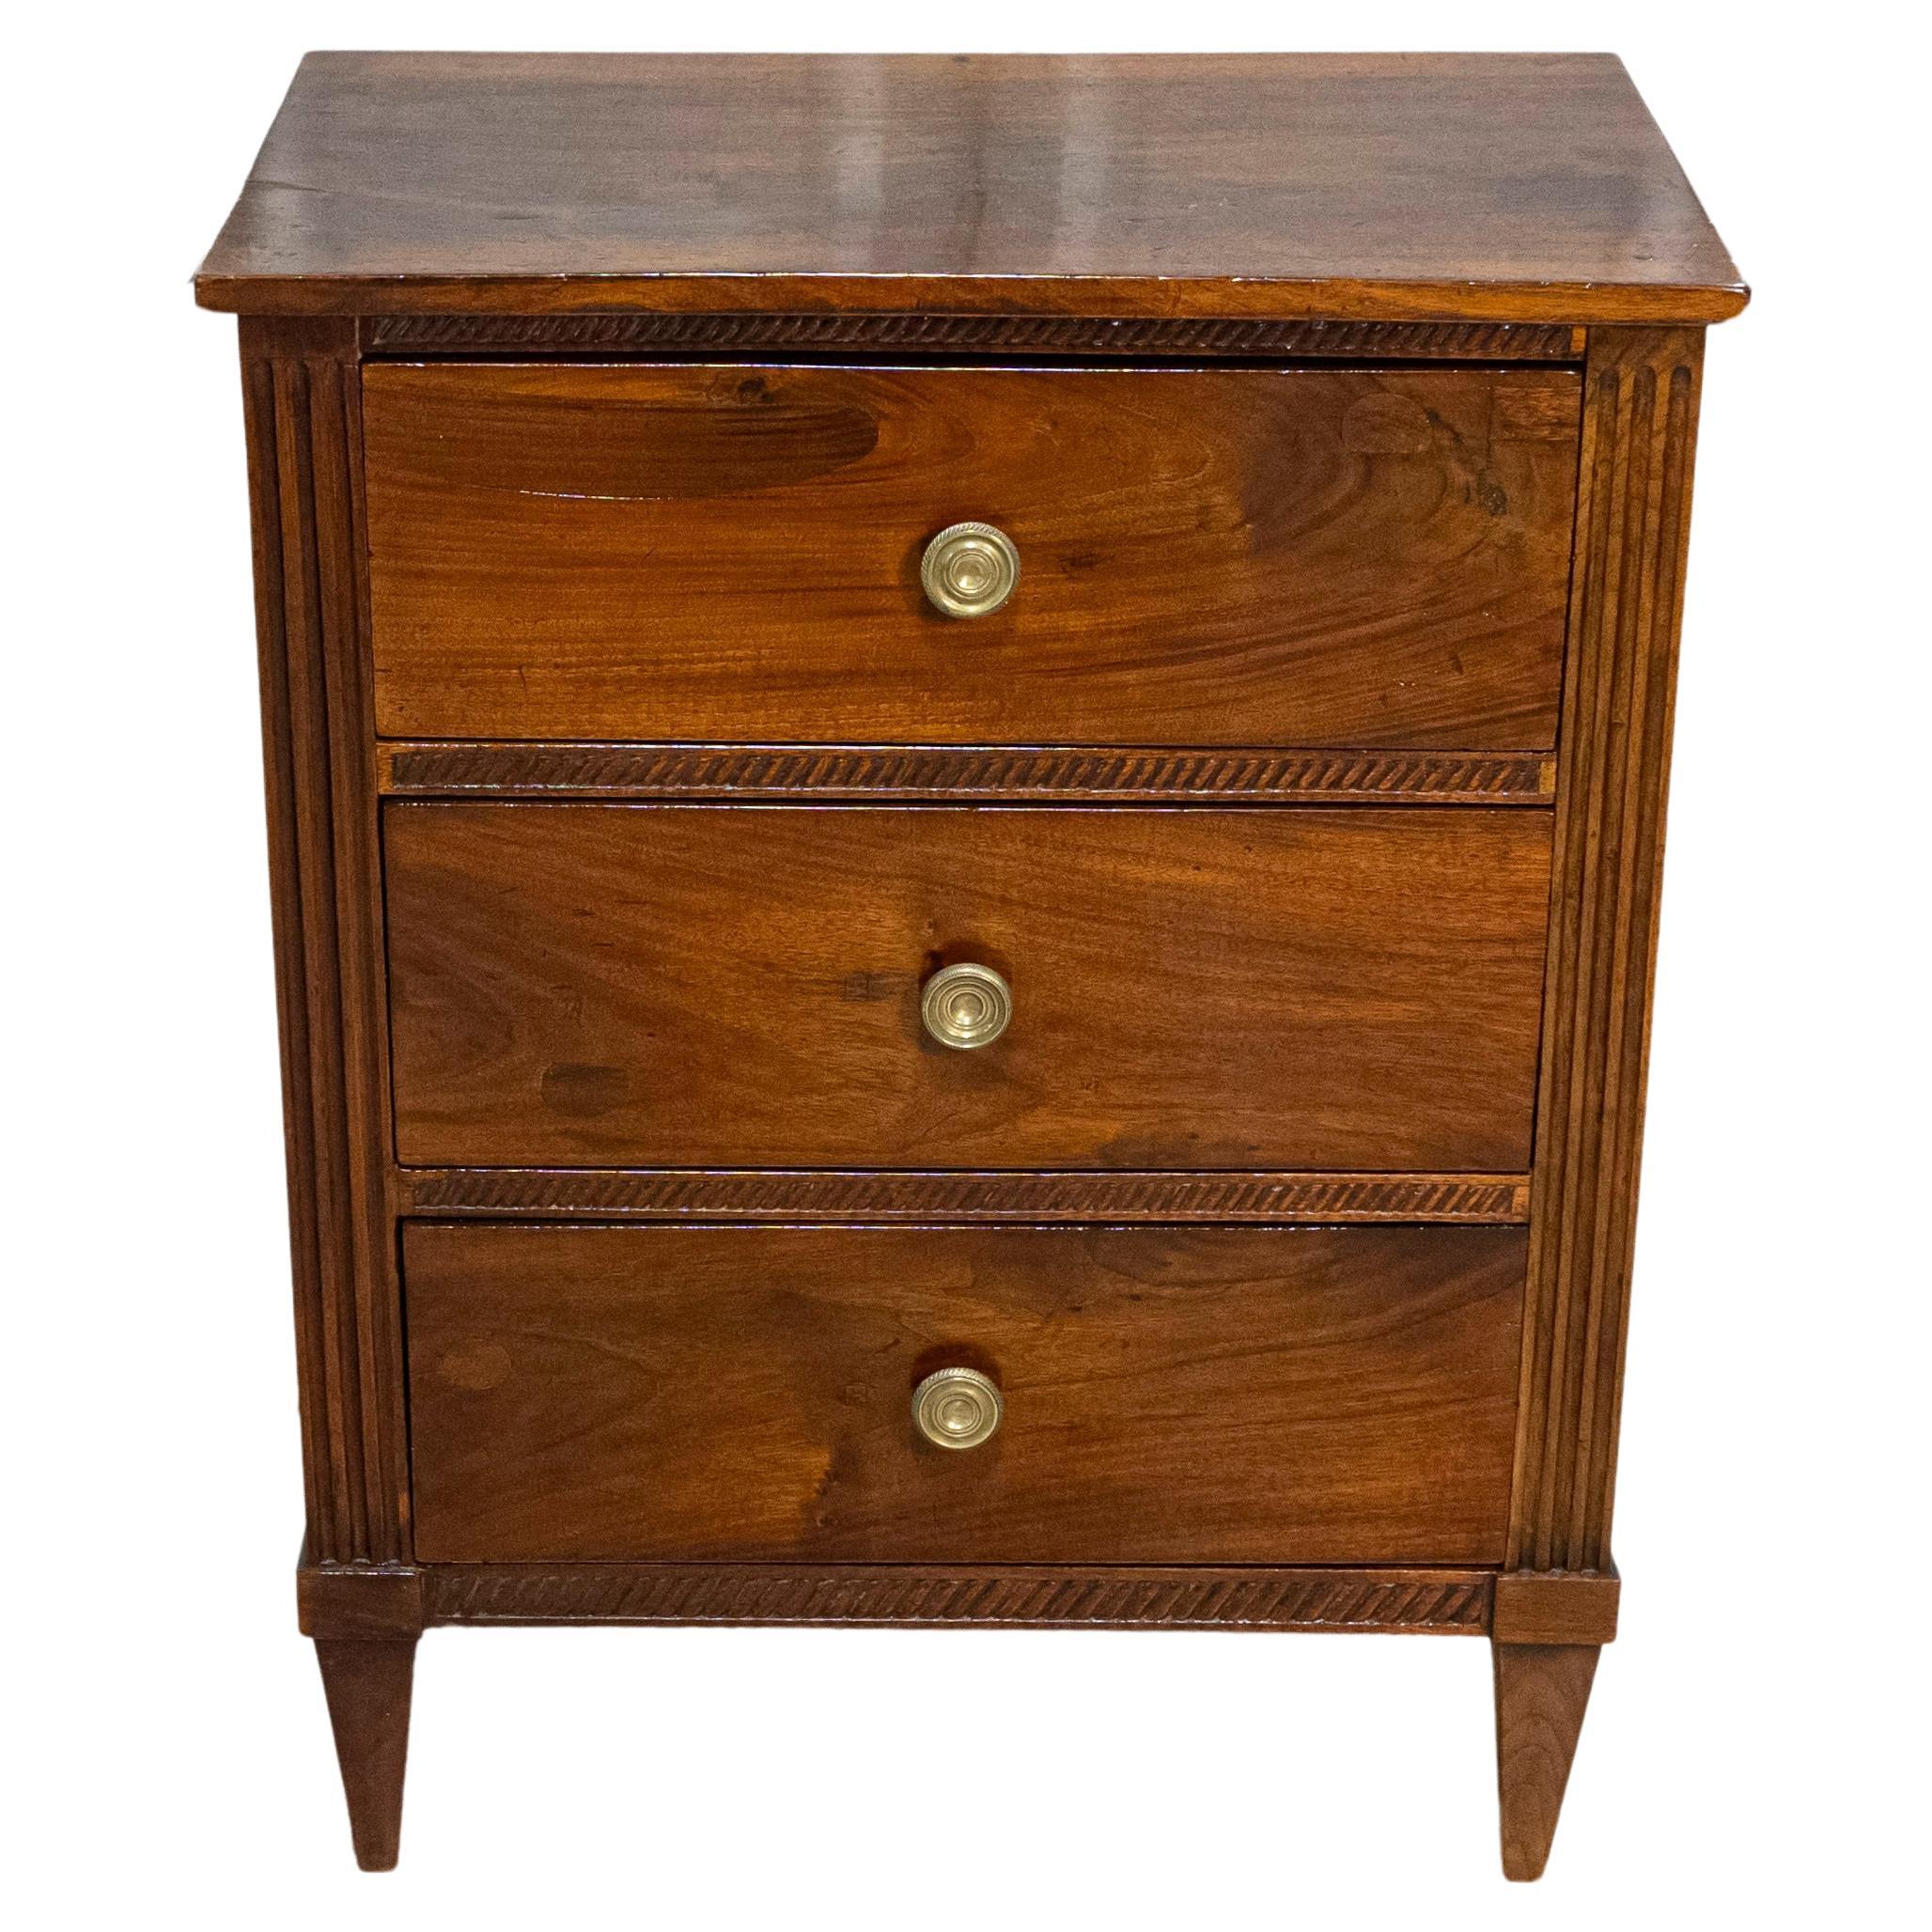 Italian Directoire Period Late 18th Century Three Drawer Walnut Bedside Chest For Sale